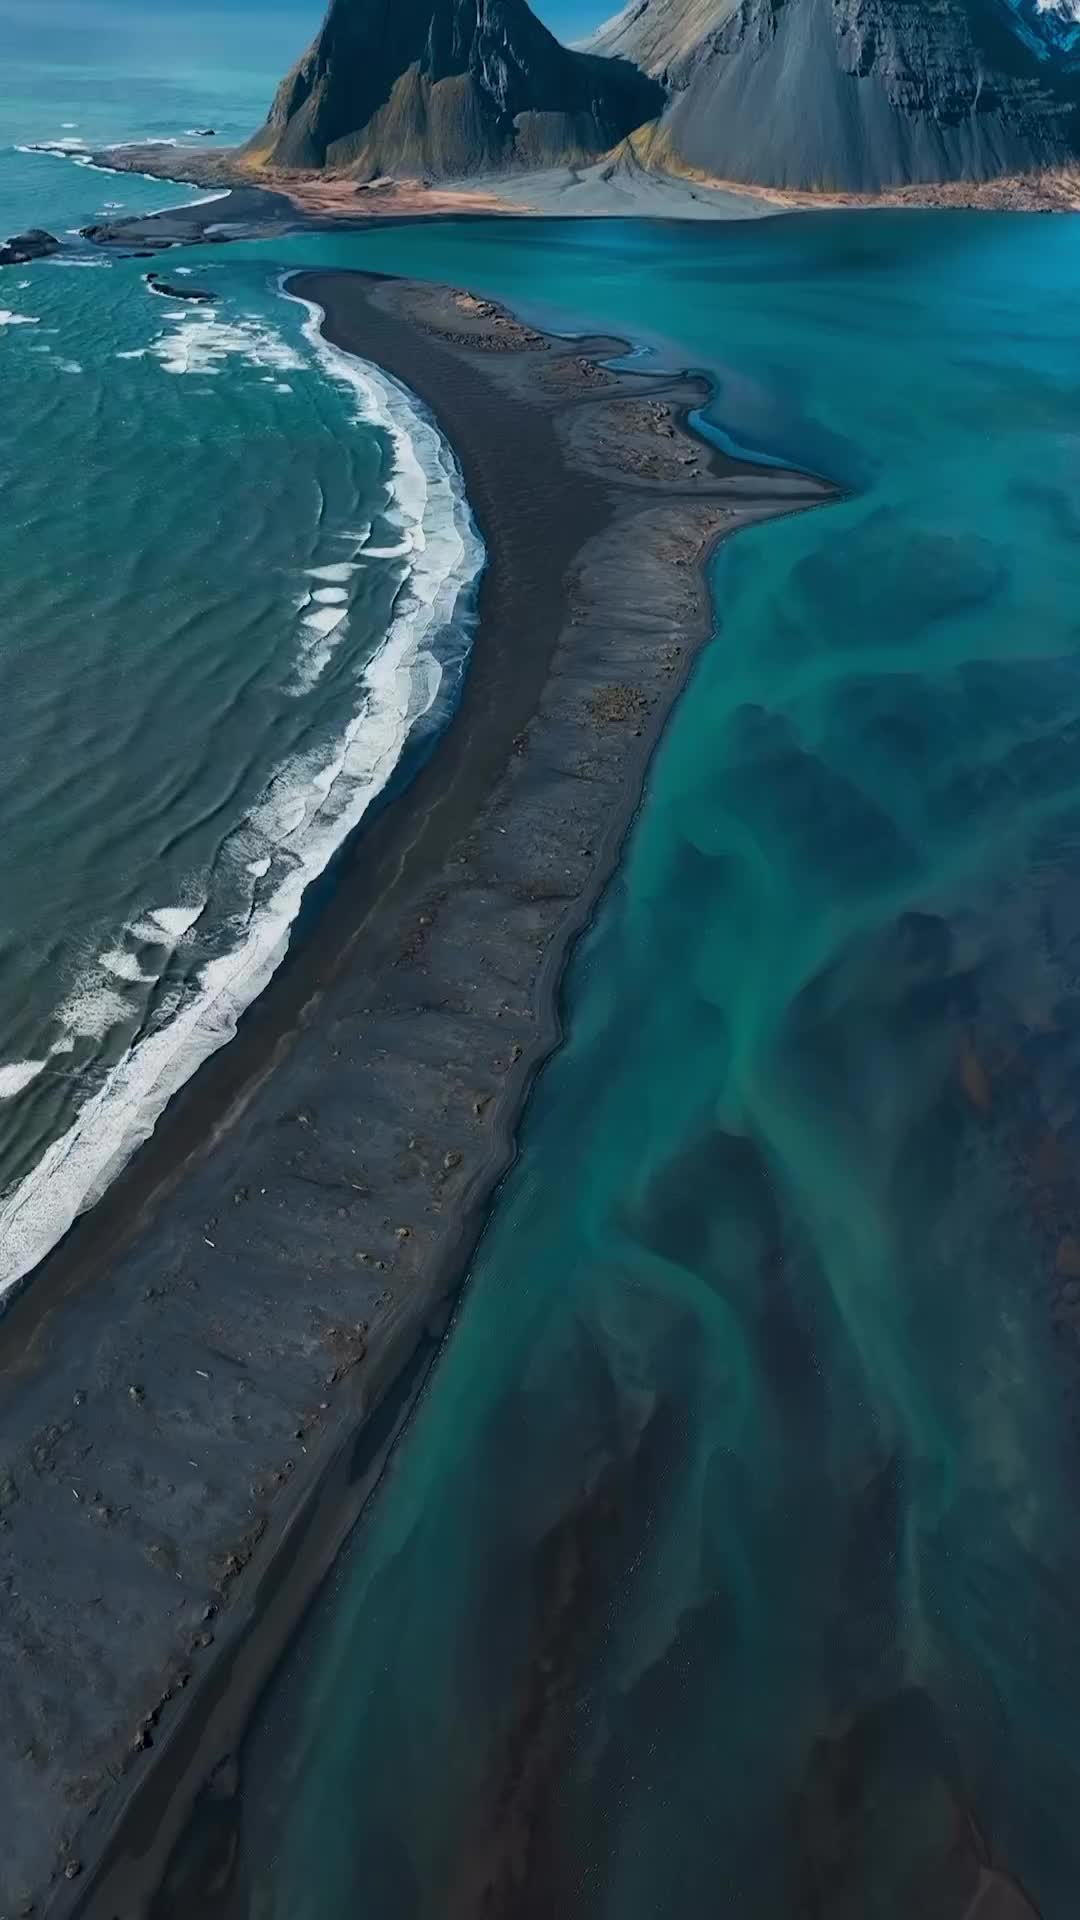 Aerials from Iceland, what a magical island this is! ✨

#Iceland #Drone #Aerial